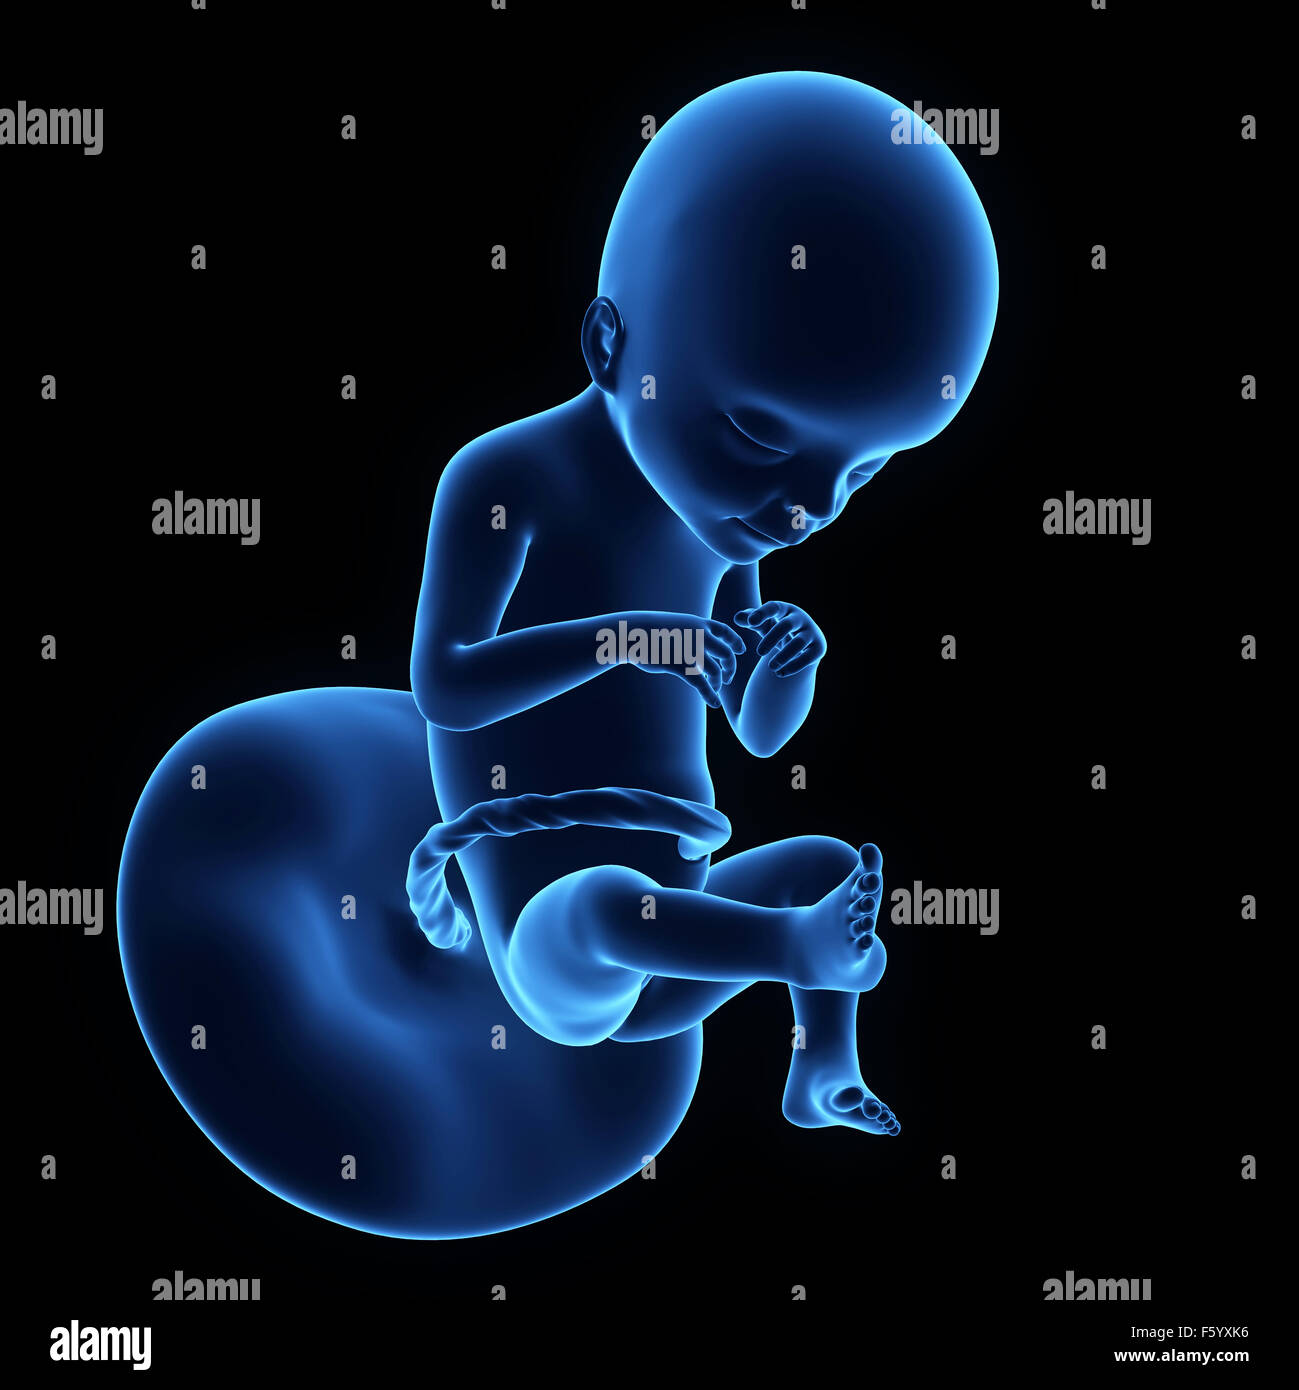 medically accurate illustration of a human fetus week 21 Stock Photo